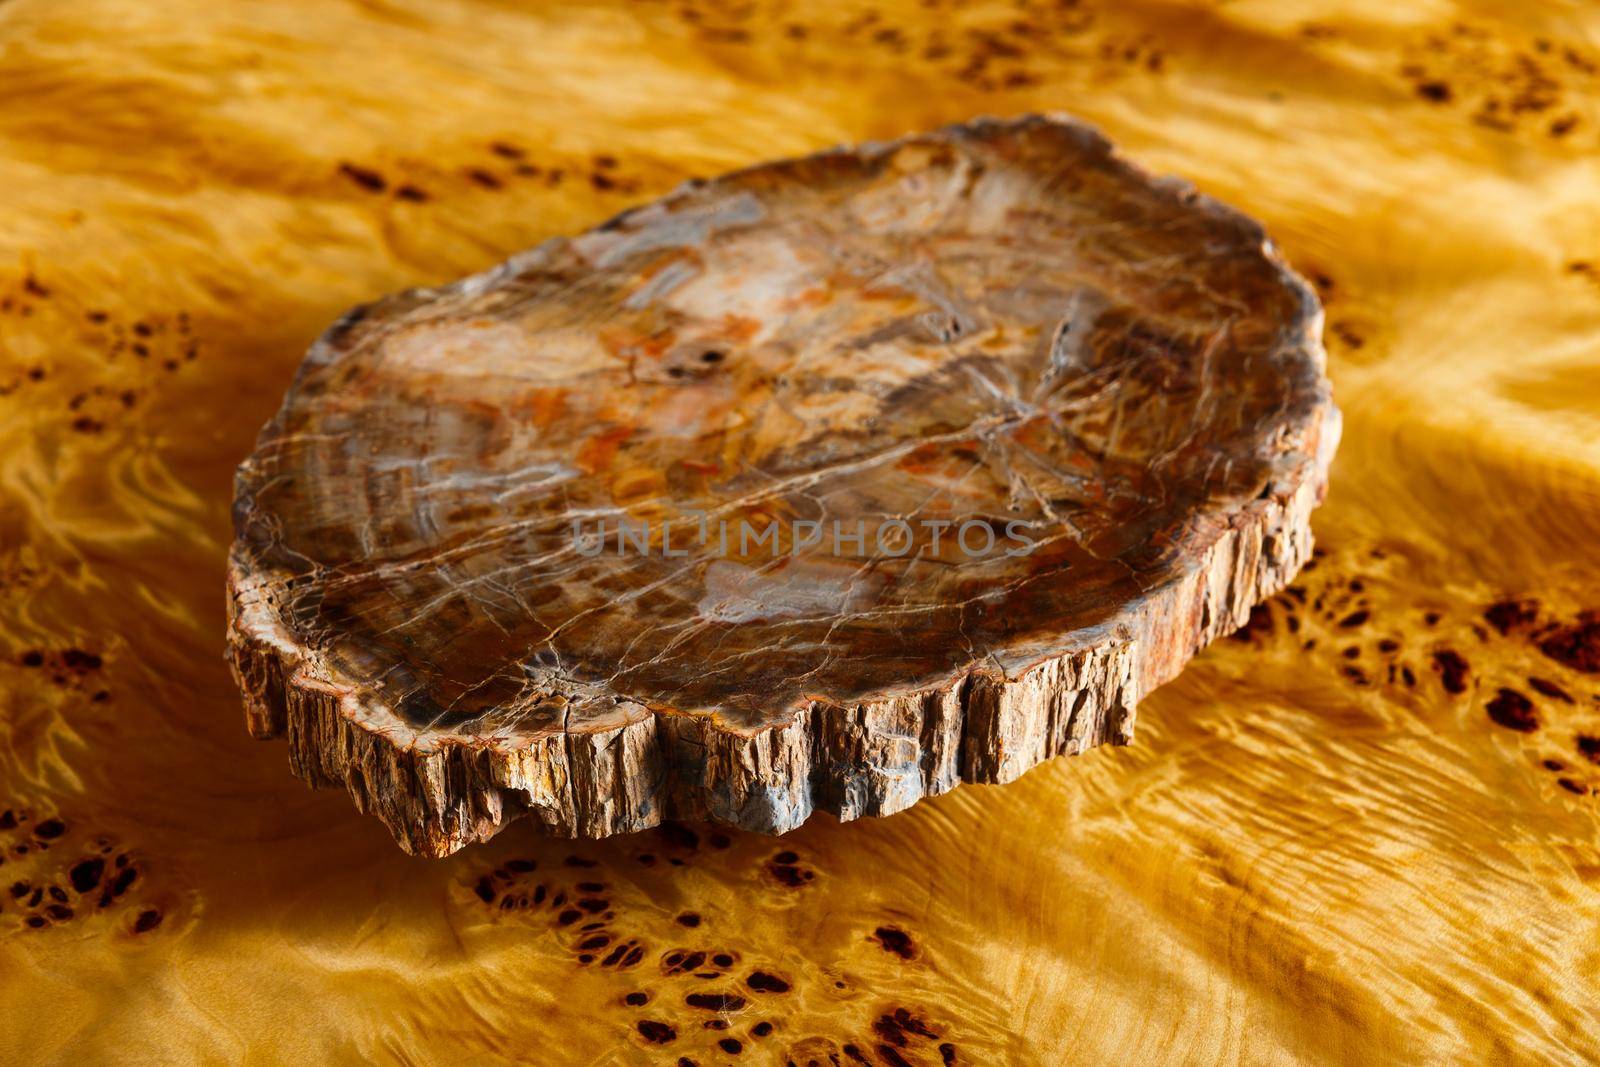 A section of ancient petrified wood by BY-_-BY